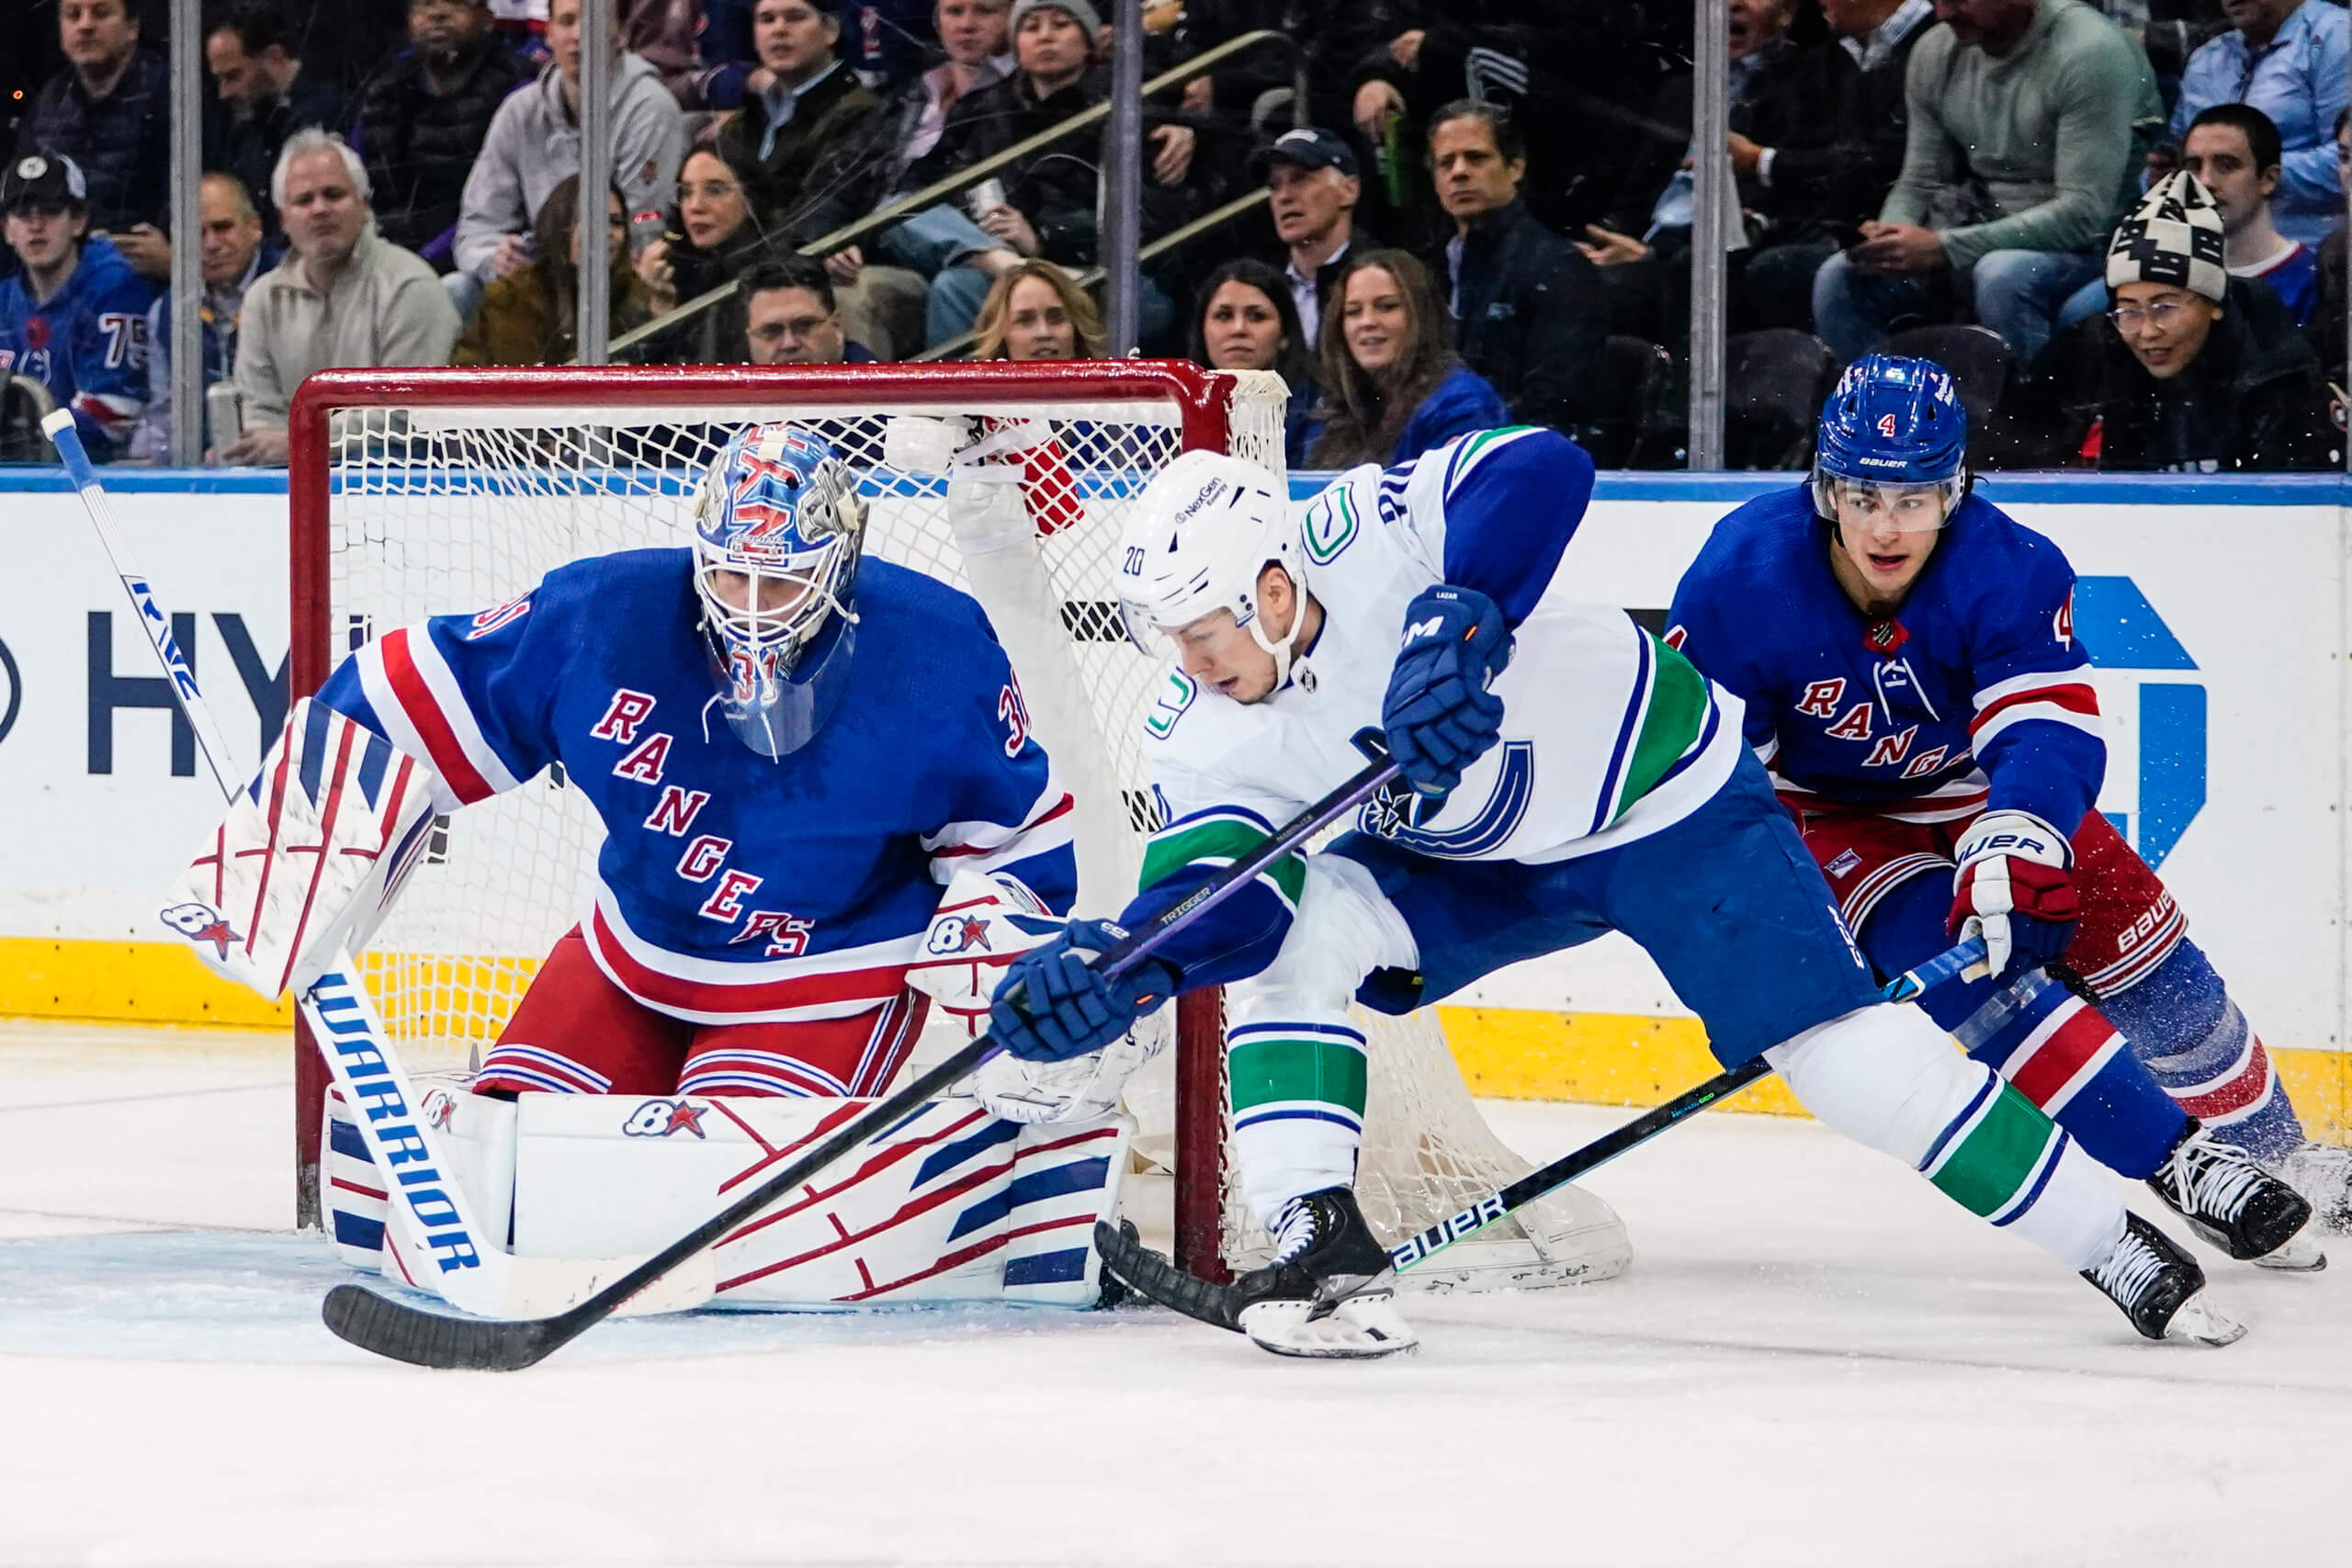 Rangers win 3rd game in a row against scrappy Canucks by a 4-3 final amNewYork